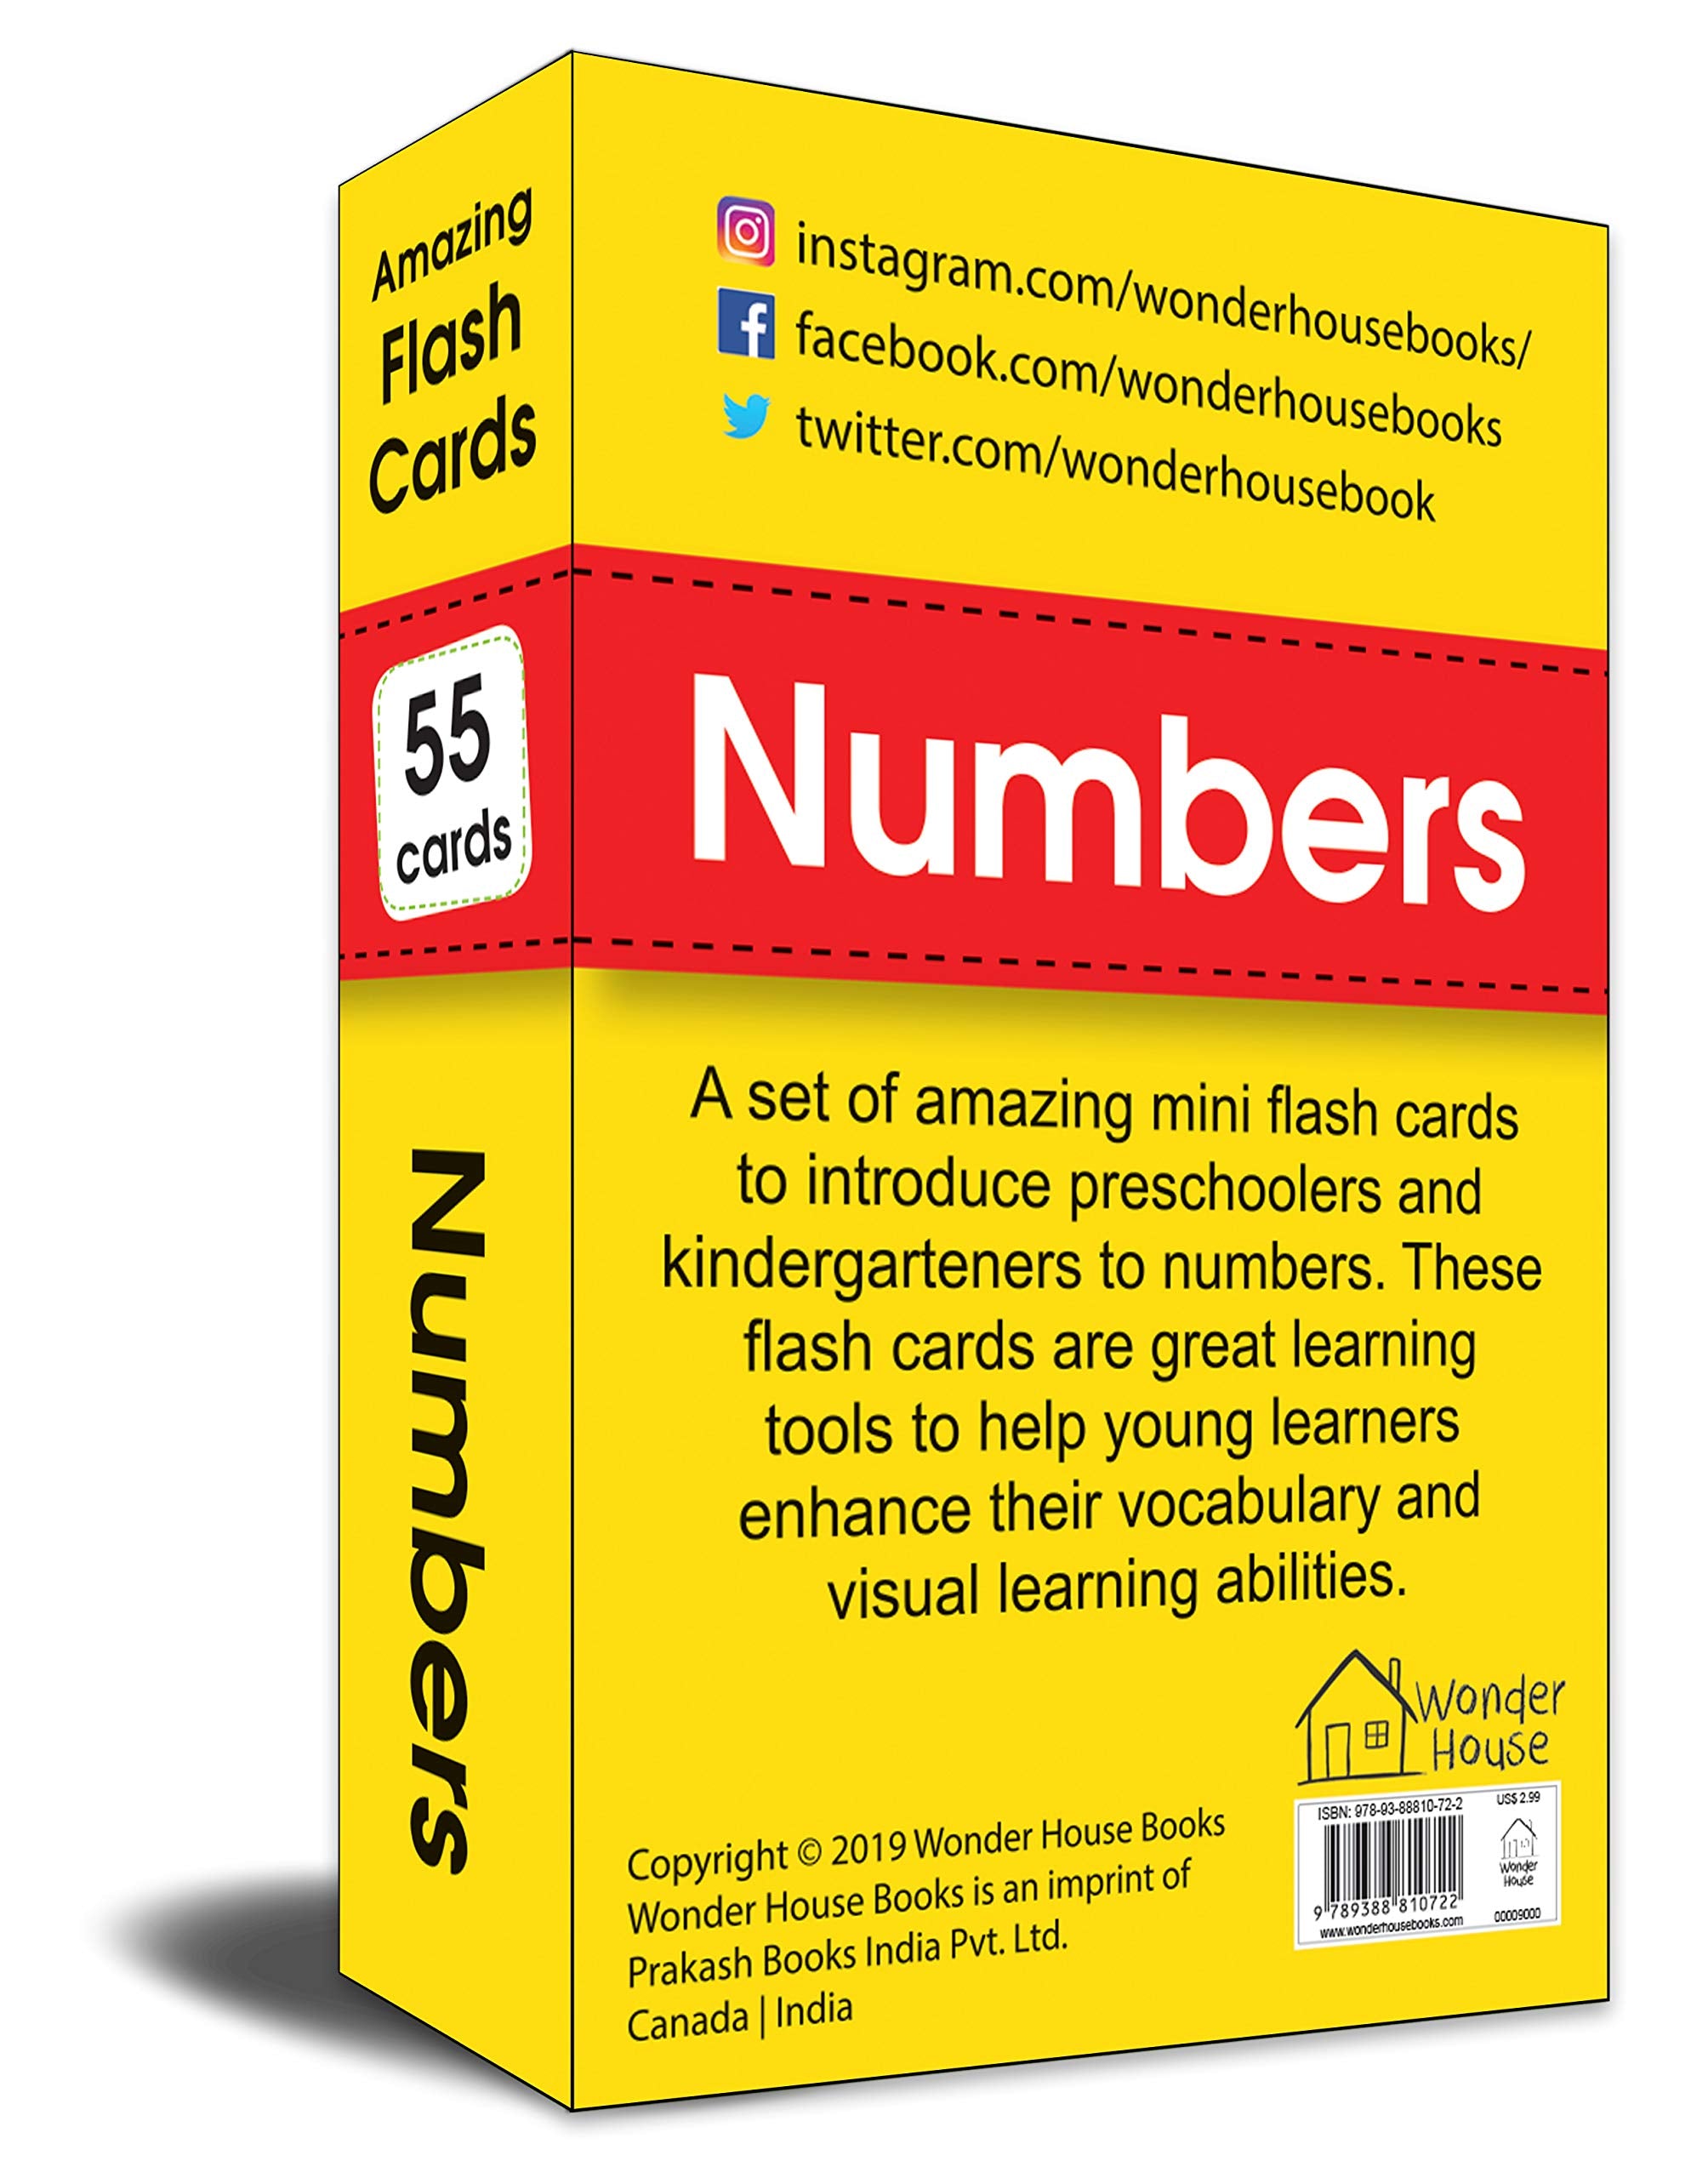 Amazing Flash Cards Numbers: Early Development OF Preschool Toddler (54 Cards)